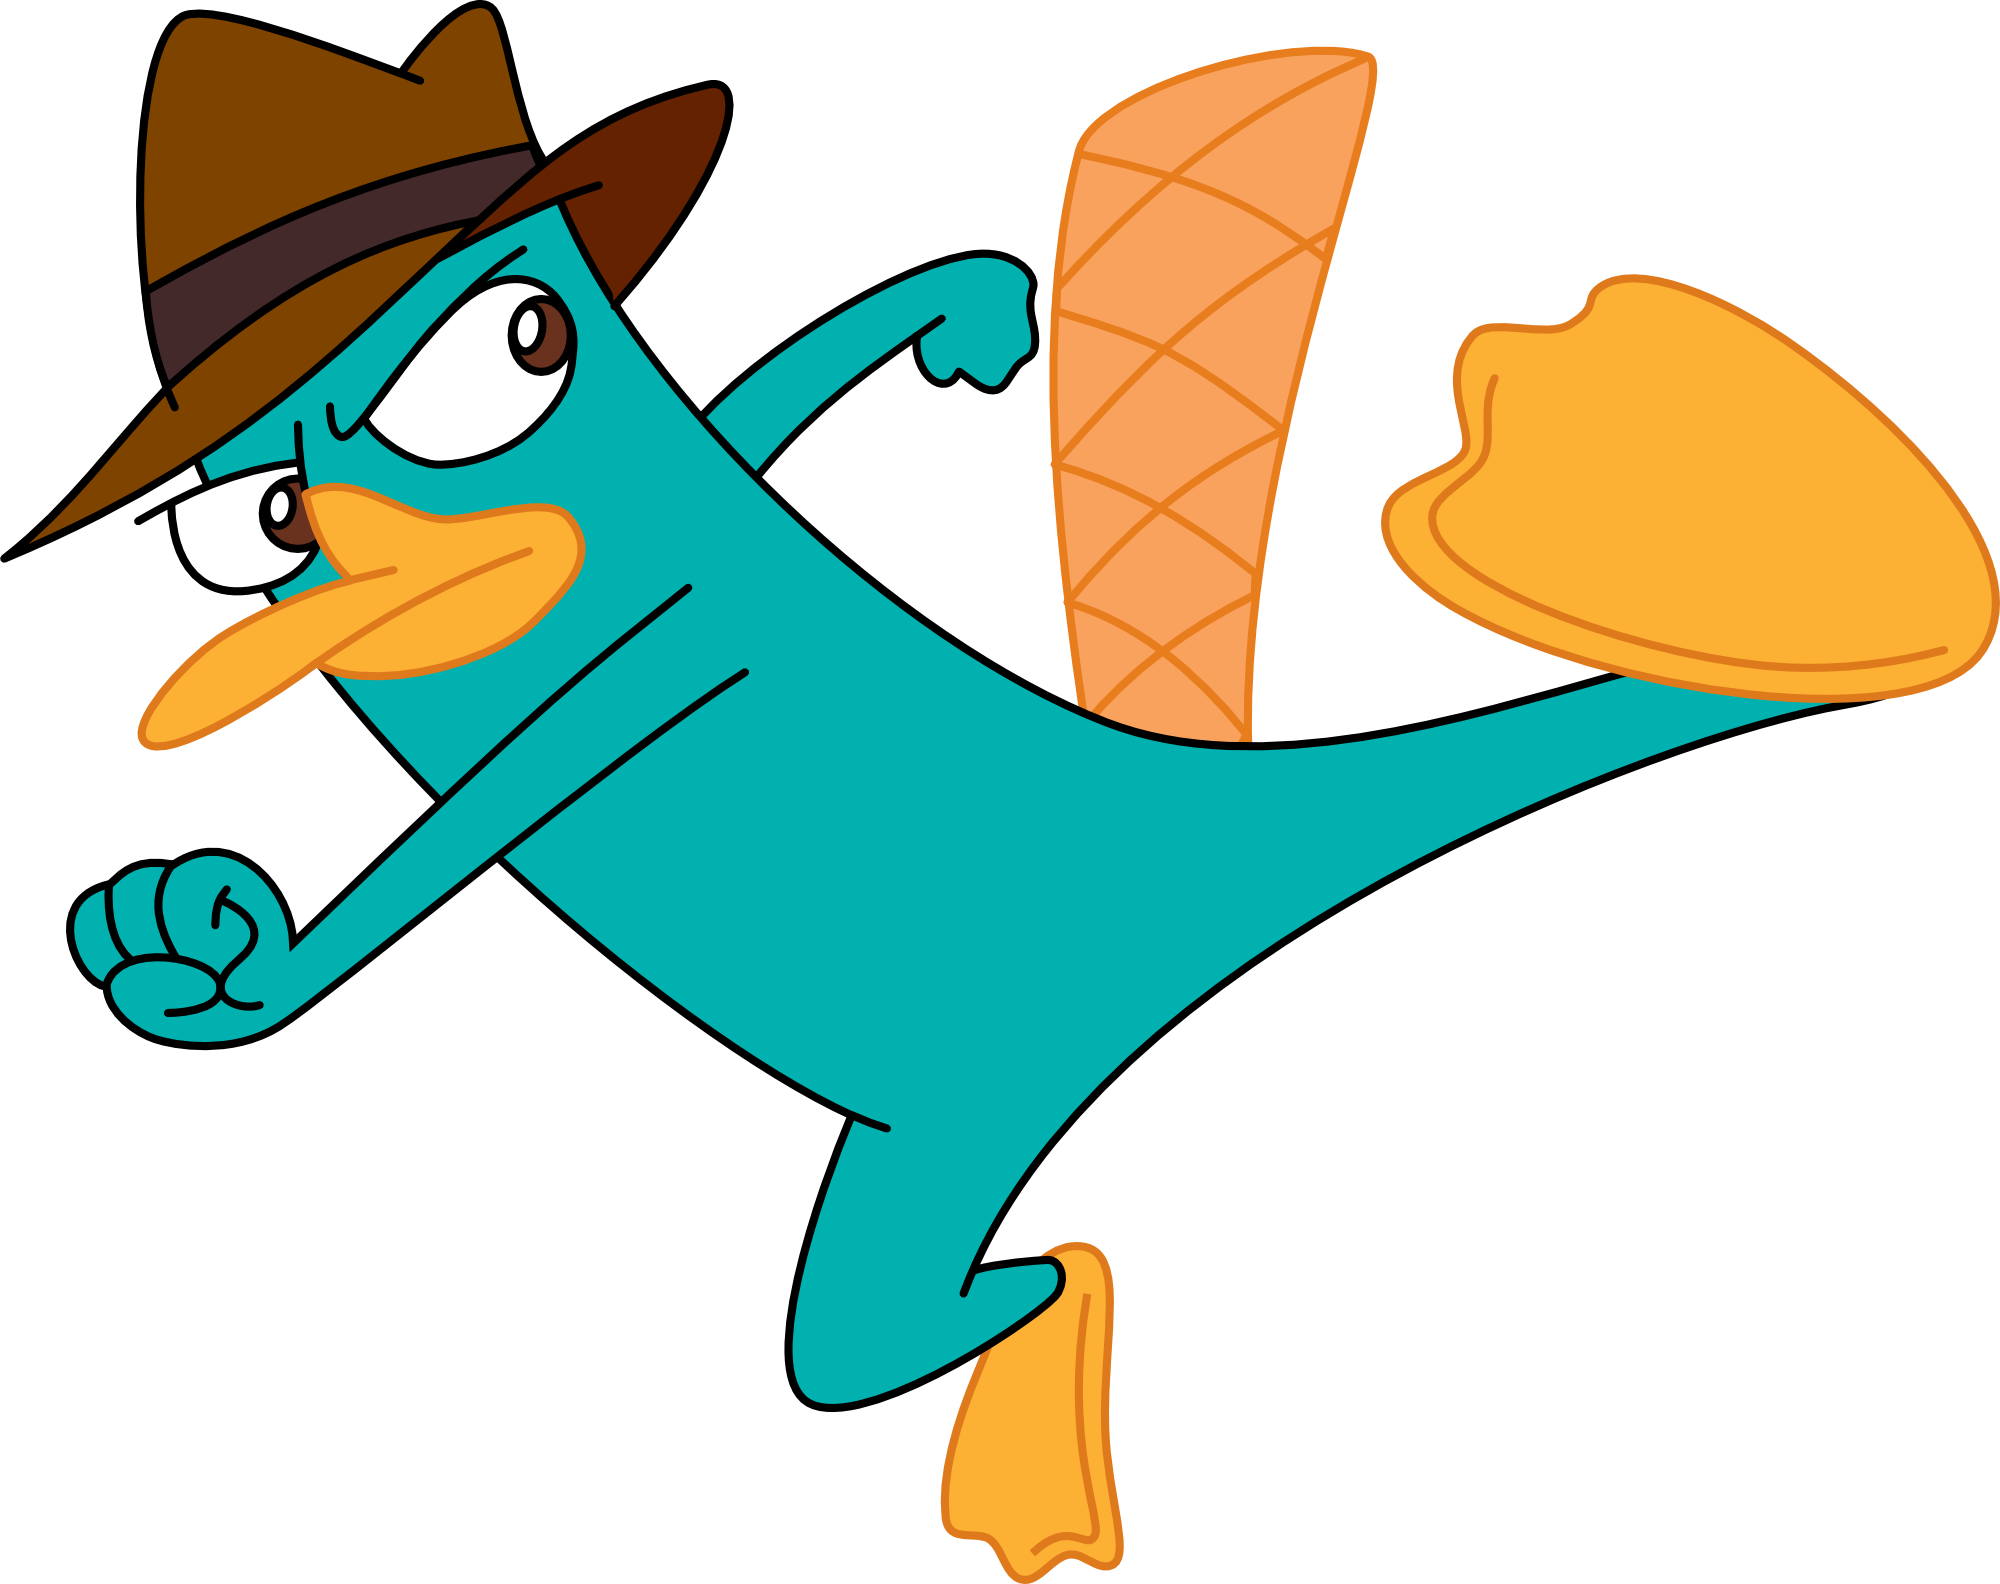 a platypus perry the platypus